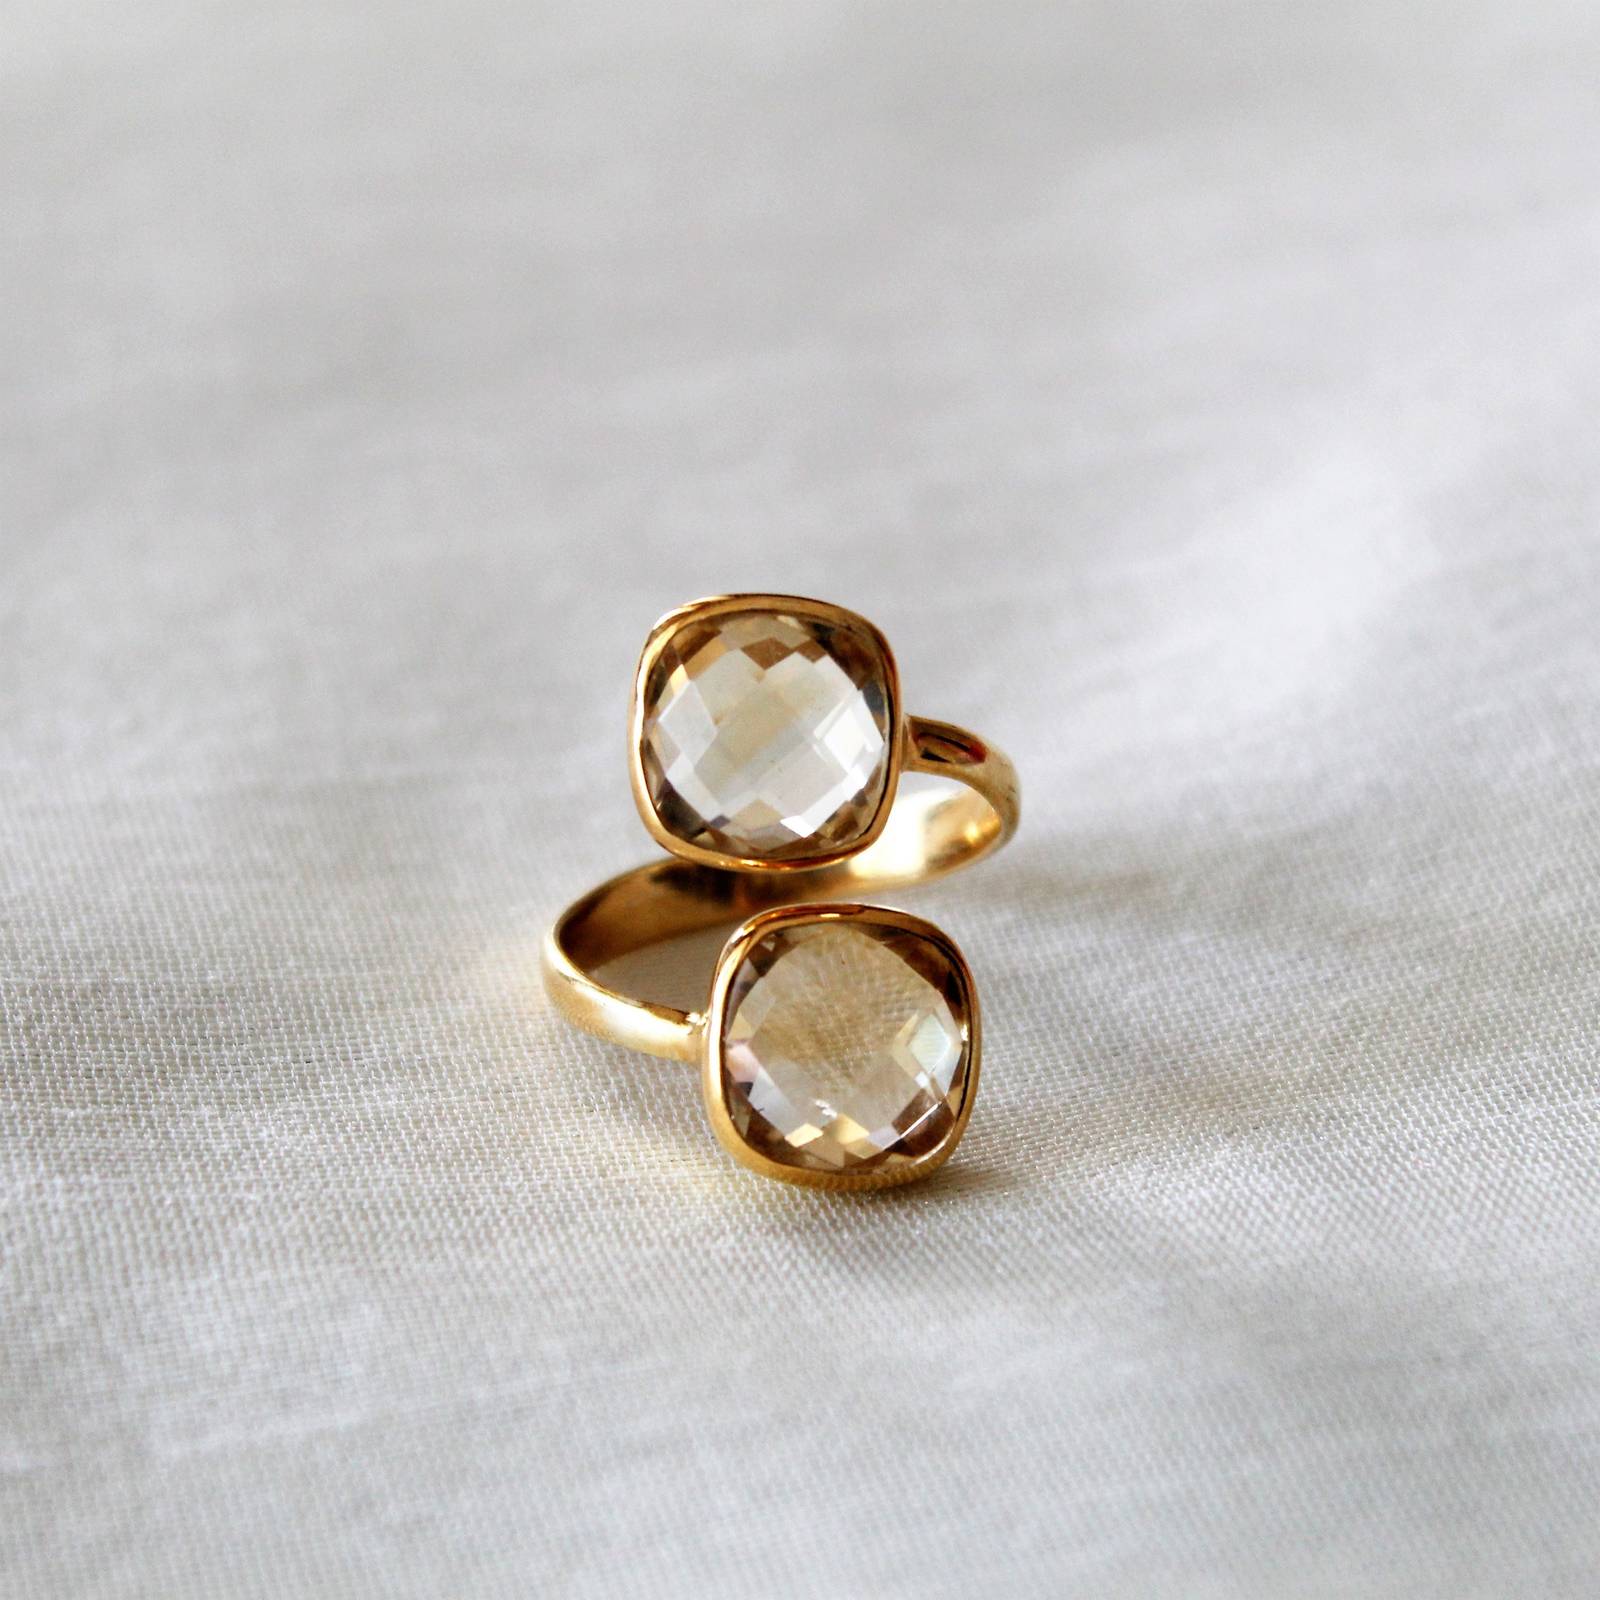 Primary image for Citrine Ring, 925 Sterling Silver Ring, Gold Plated Ring, Wrap Ring, Statement R